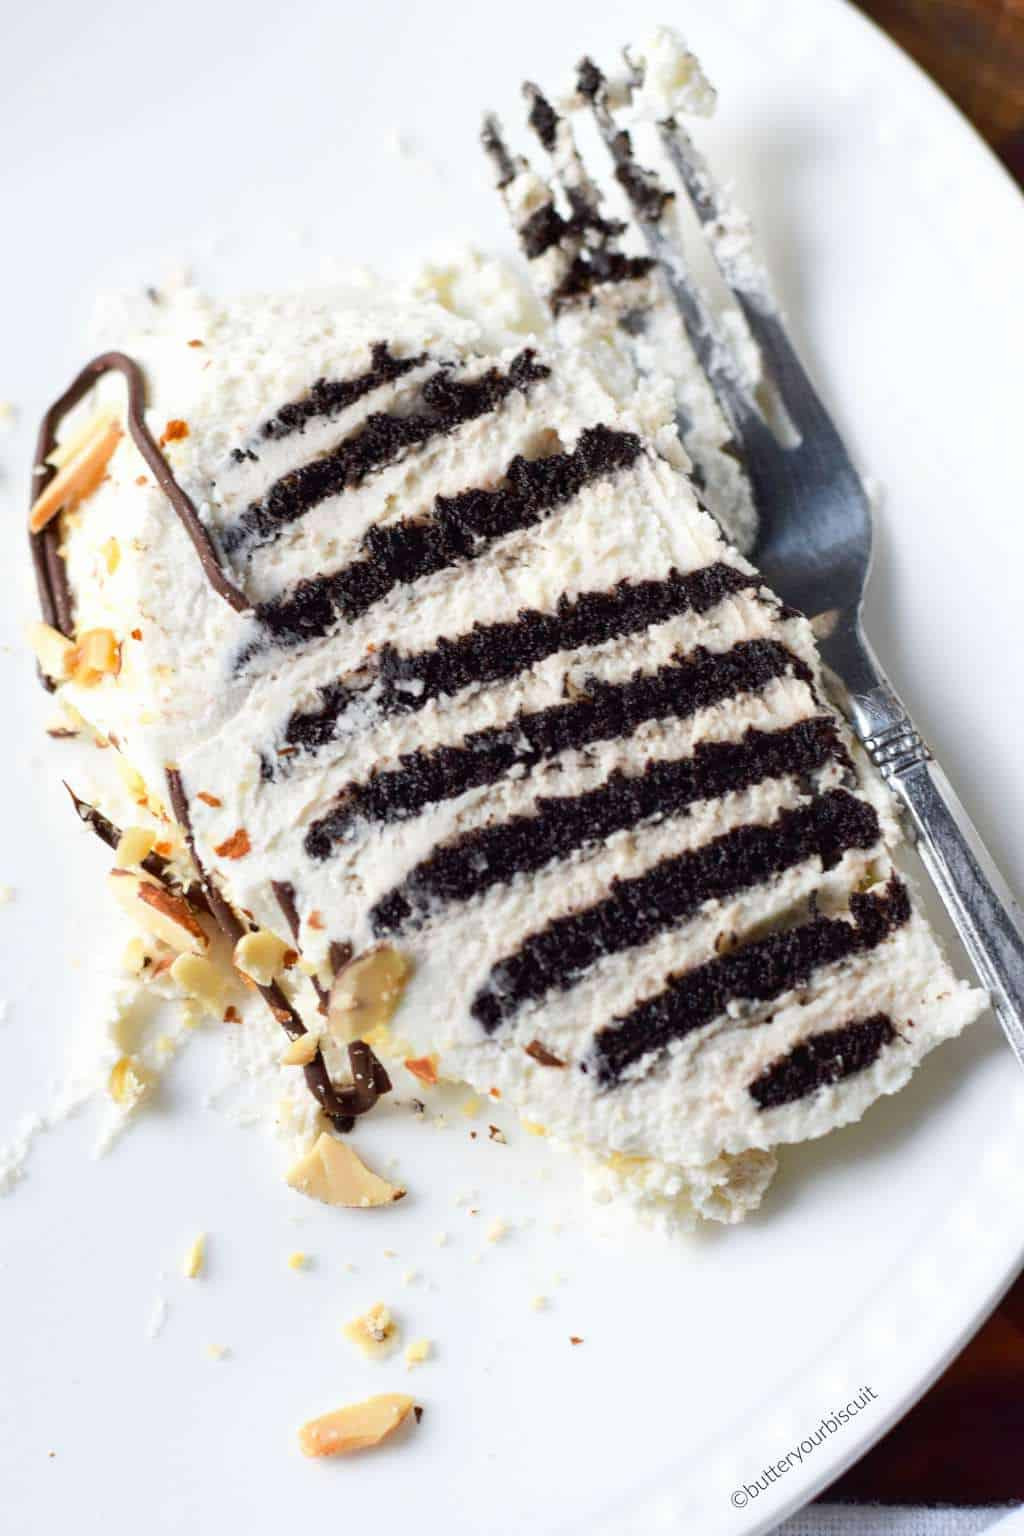 Chocolate Wafer Icebox Cake
 Chocolate Wafer Icebox Cake Recipe Butter Your Biscuit